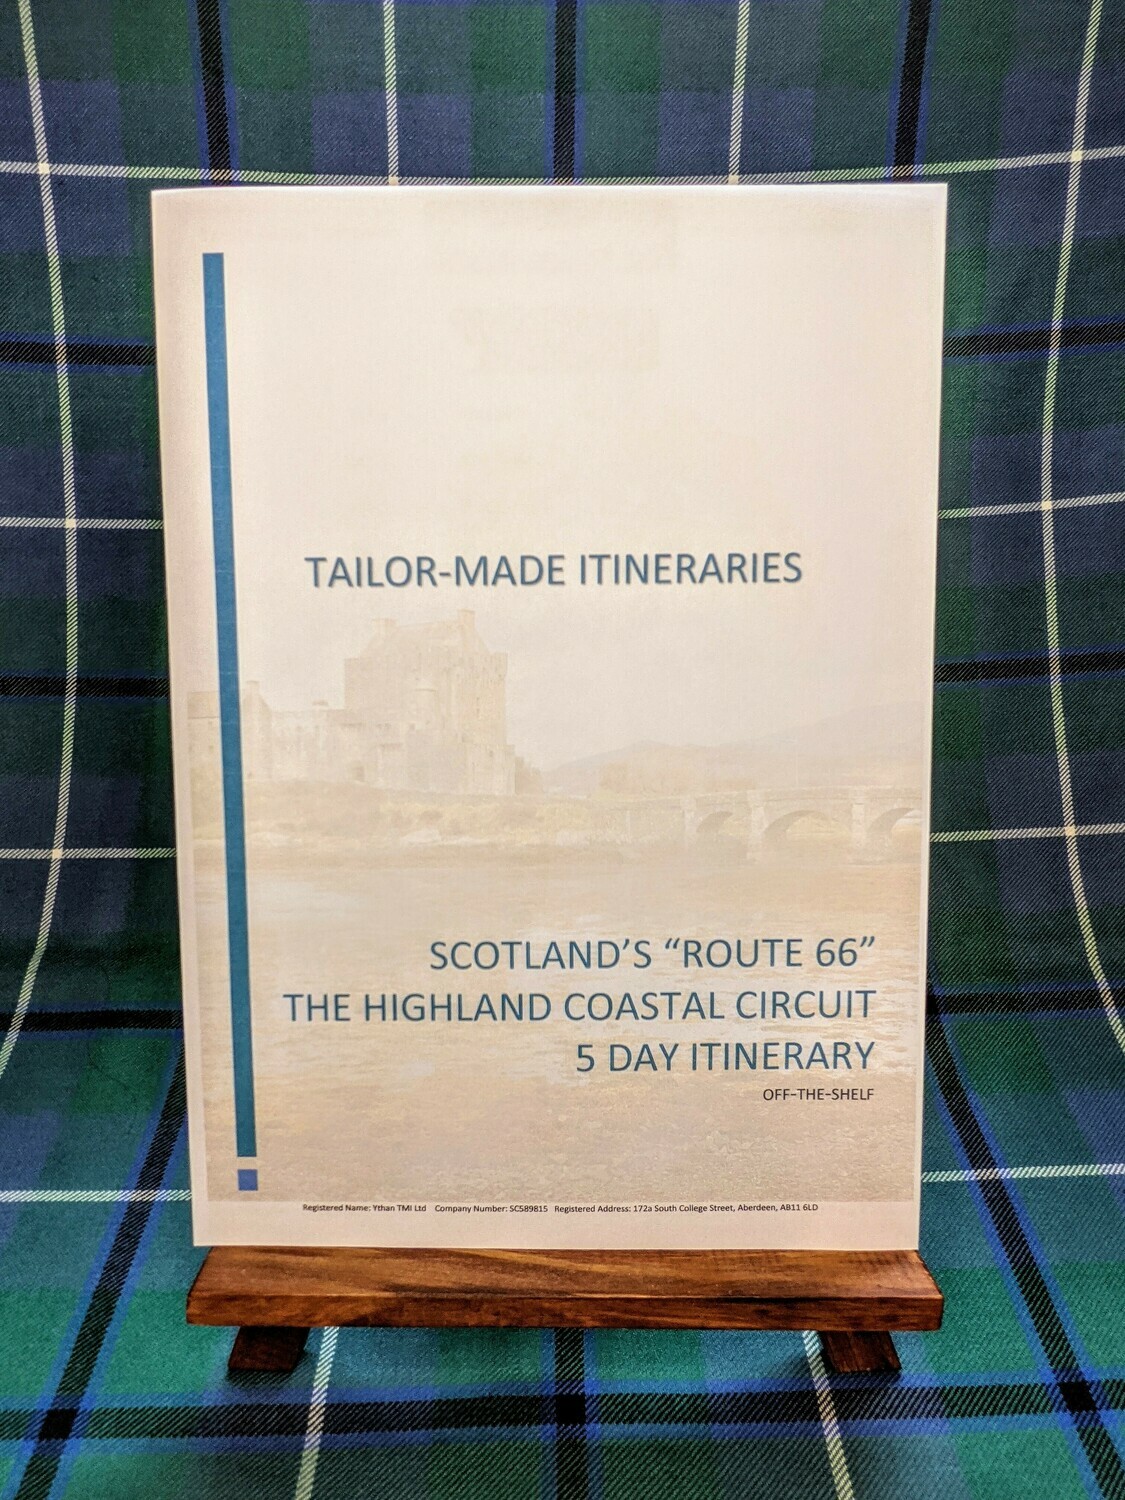 Scotland's "Route 66" - 5 Day Itinerary - Electronic Copy